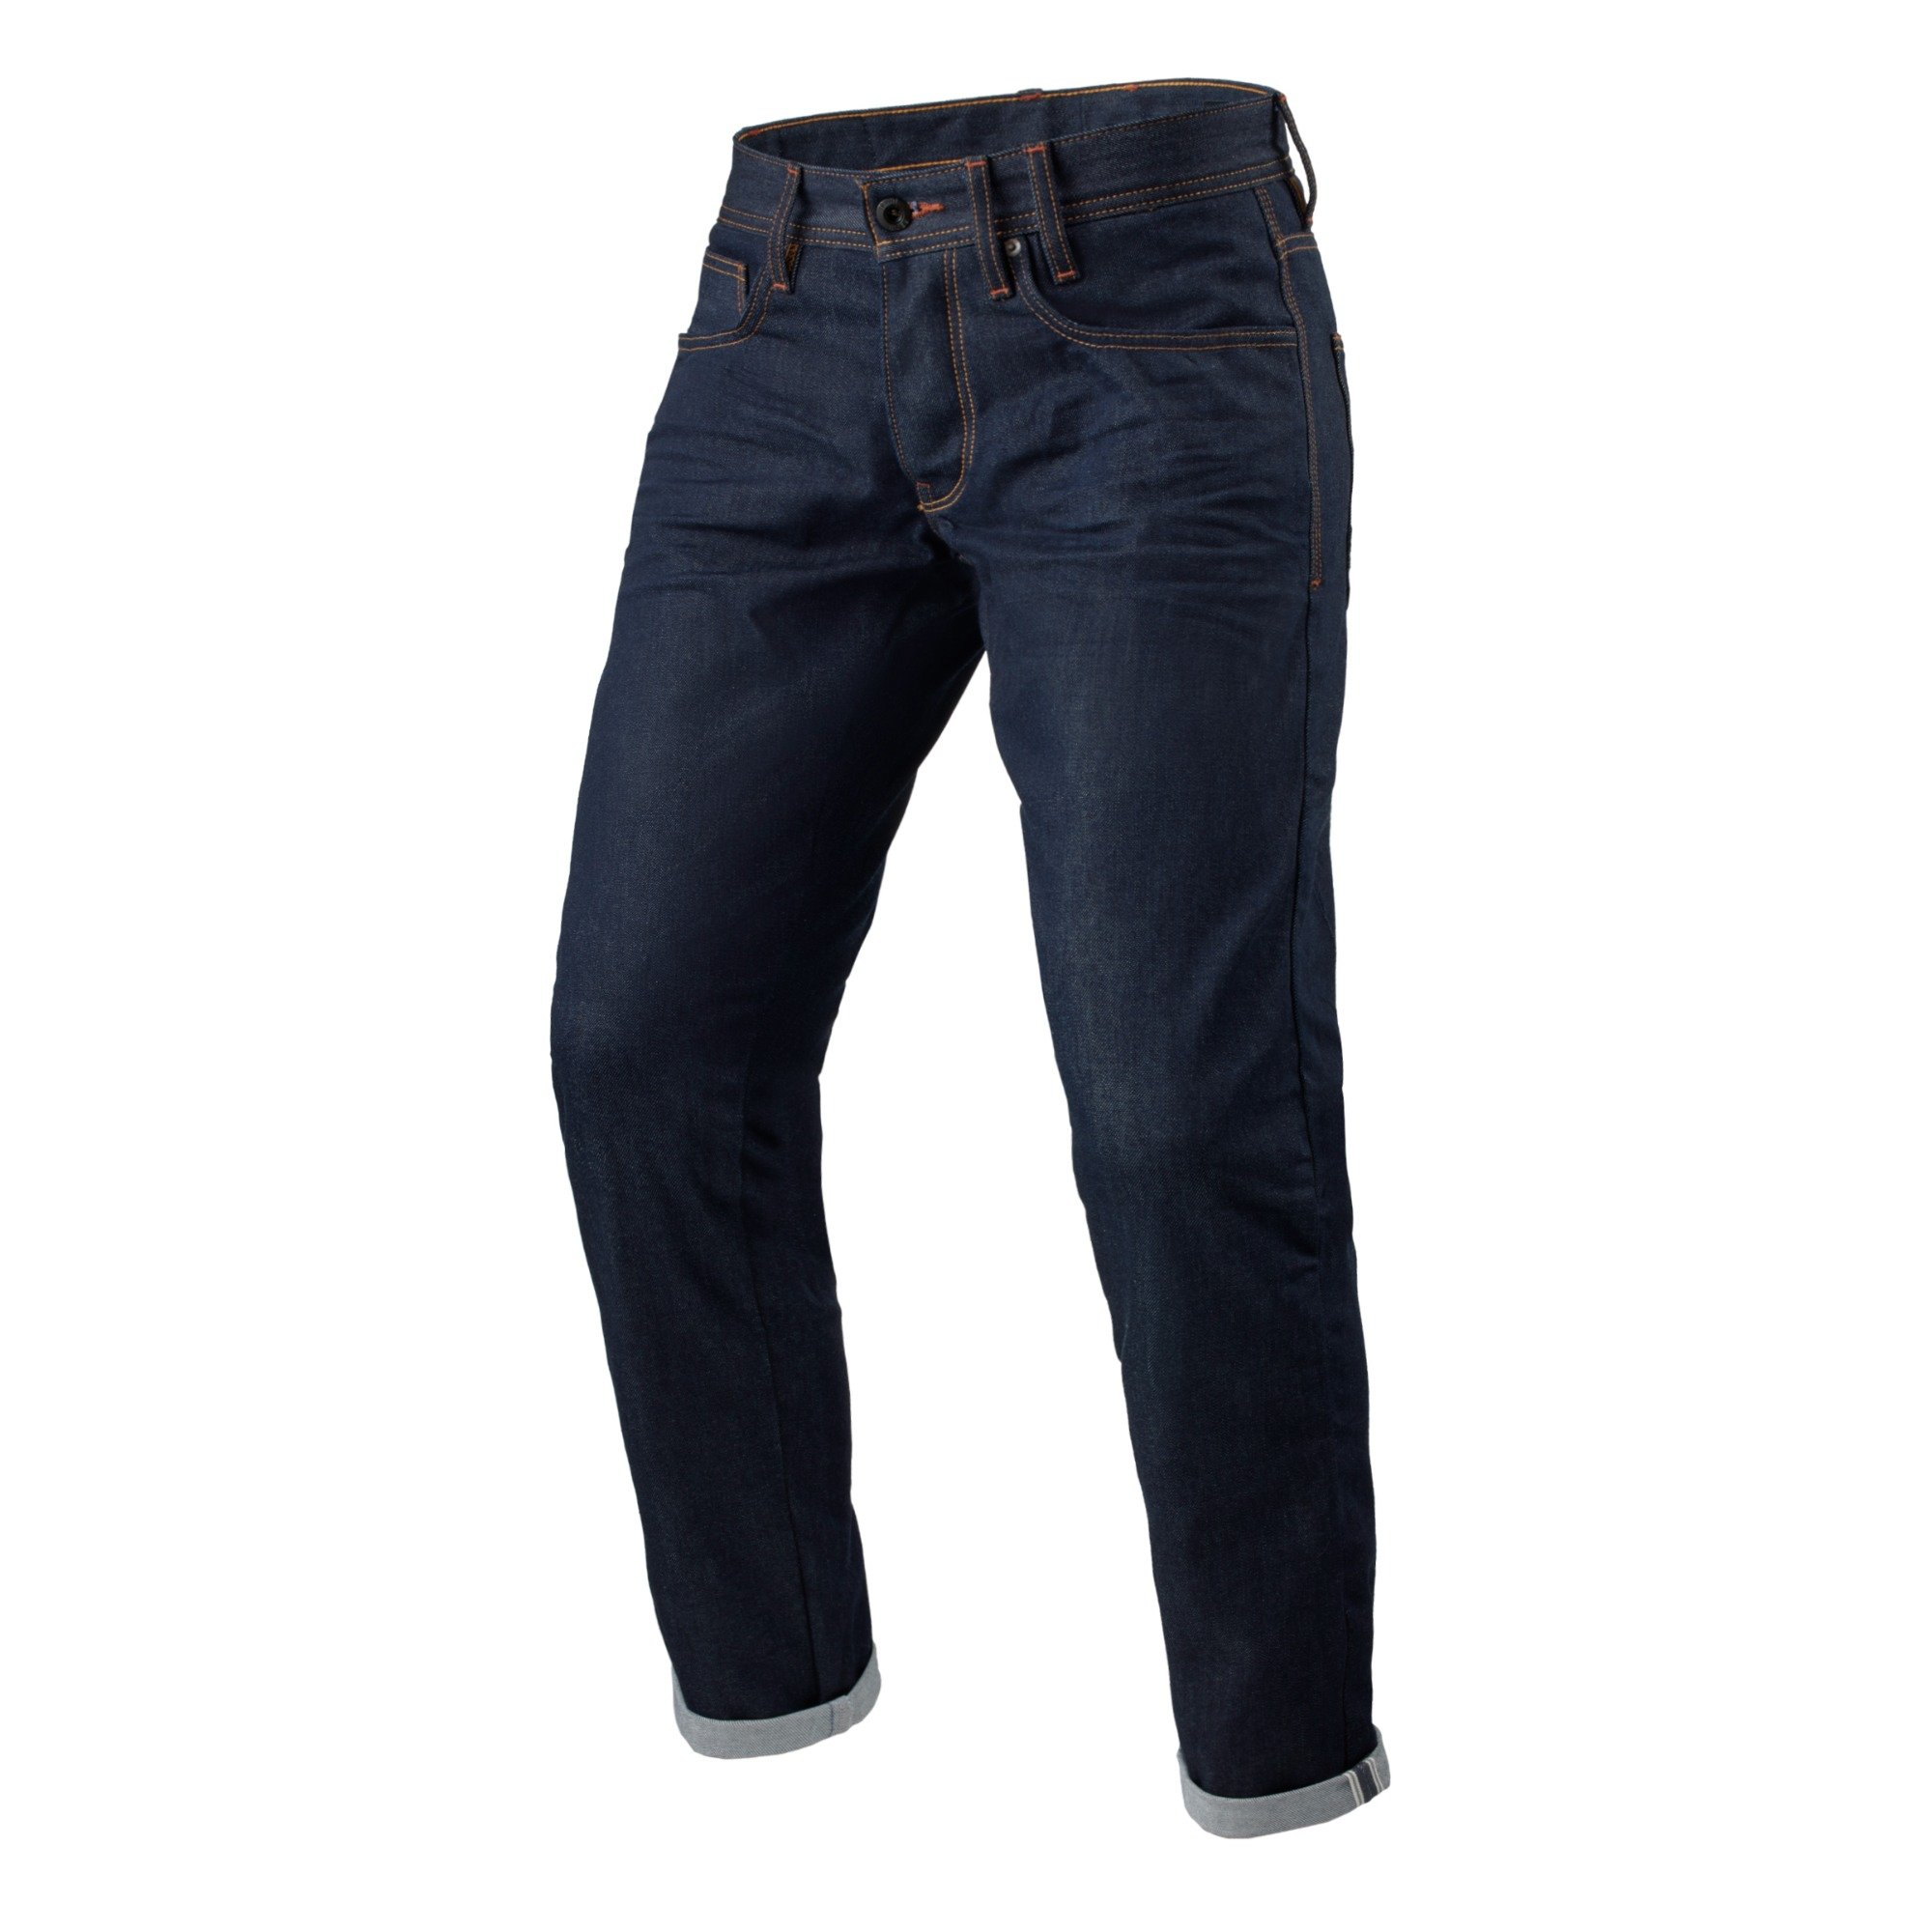 Image of REV'IT! Jeans Lewis Selvedge TF Dark Blue L32 Motorcycle Pants Size L32/W32 ID 8700001358057